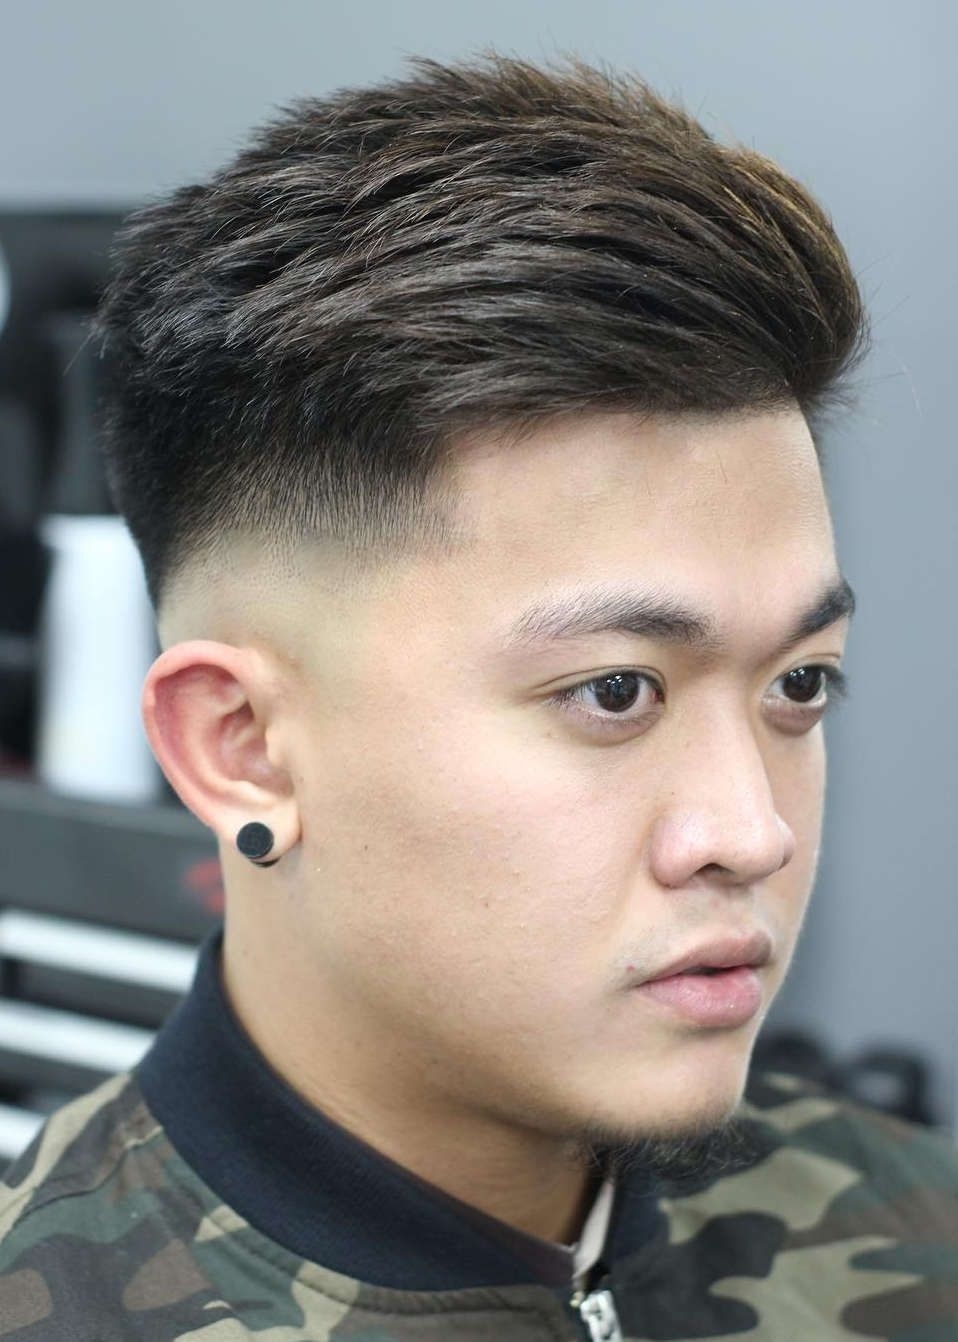 Top 30 Trendy Asian Men Hairstyles 2019 | Hair, Nails &amp;amp; Makeup in Amazing Asian Boy Short Hairstyles